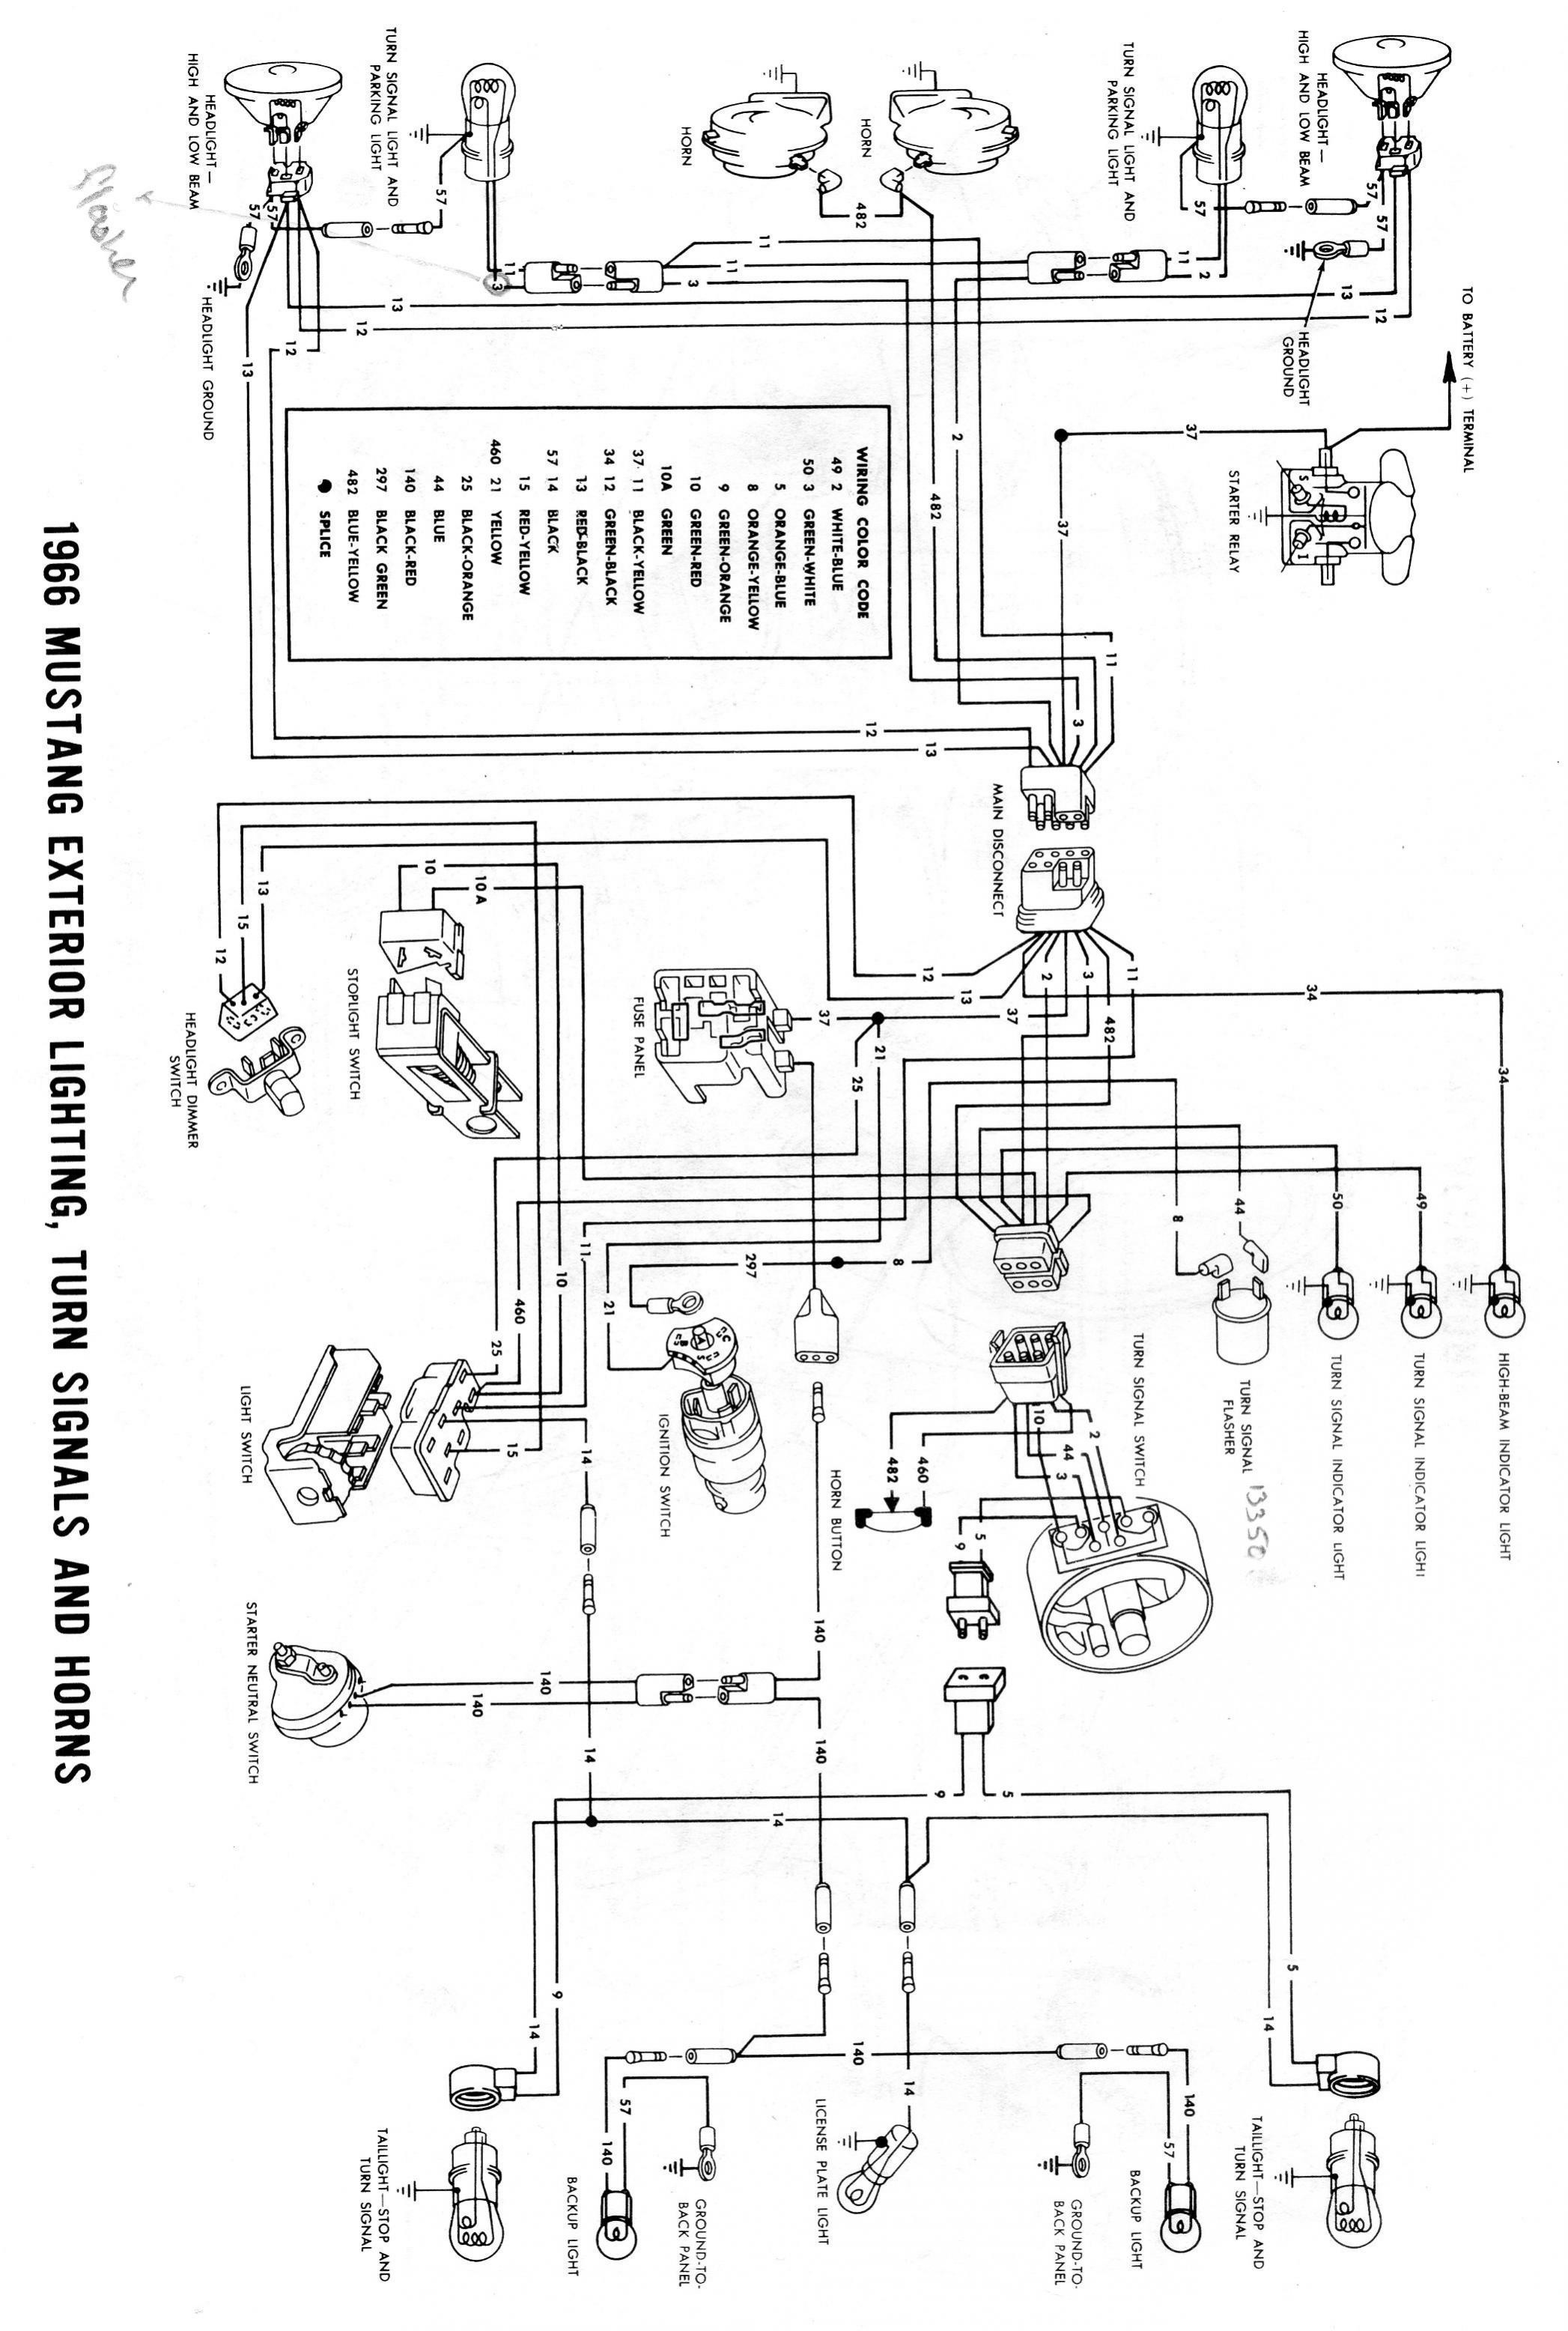 67 mustang turn signal switch wiring diagram rate 1966 mustang rh zookastar Ford Turn Signal